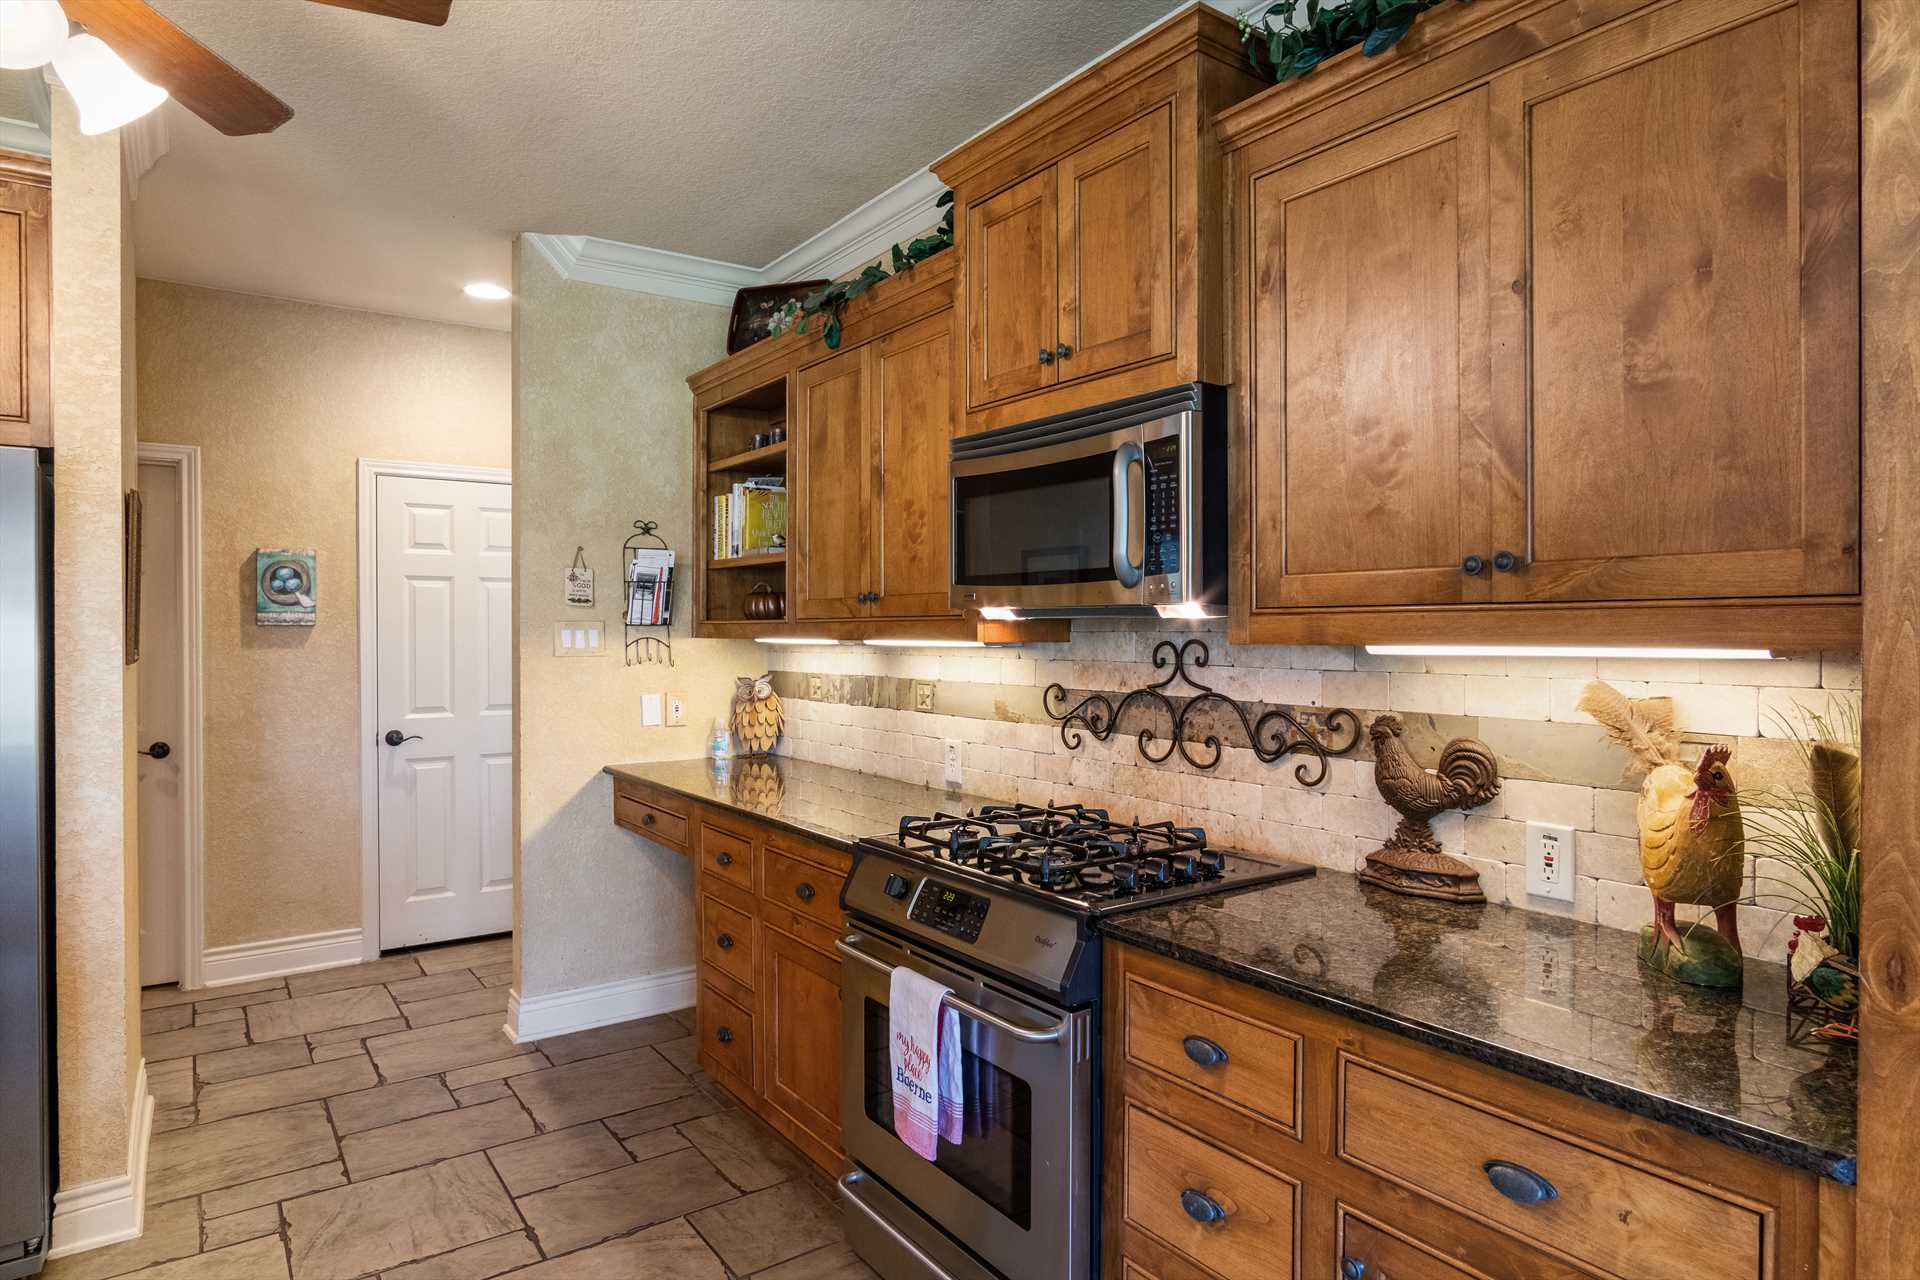                                                 The pretty wood cabinetry in the kitchen opens up to plenty of cooking ware, dining ware, utensils, and glasses.